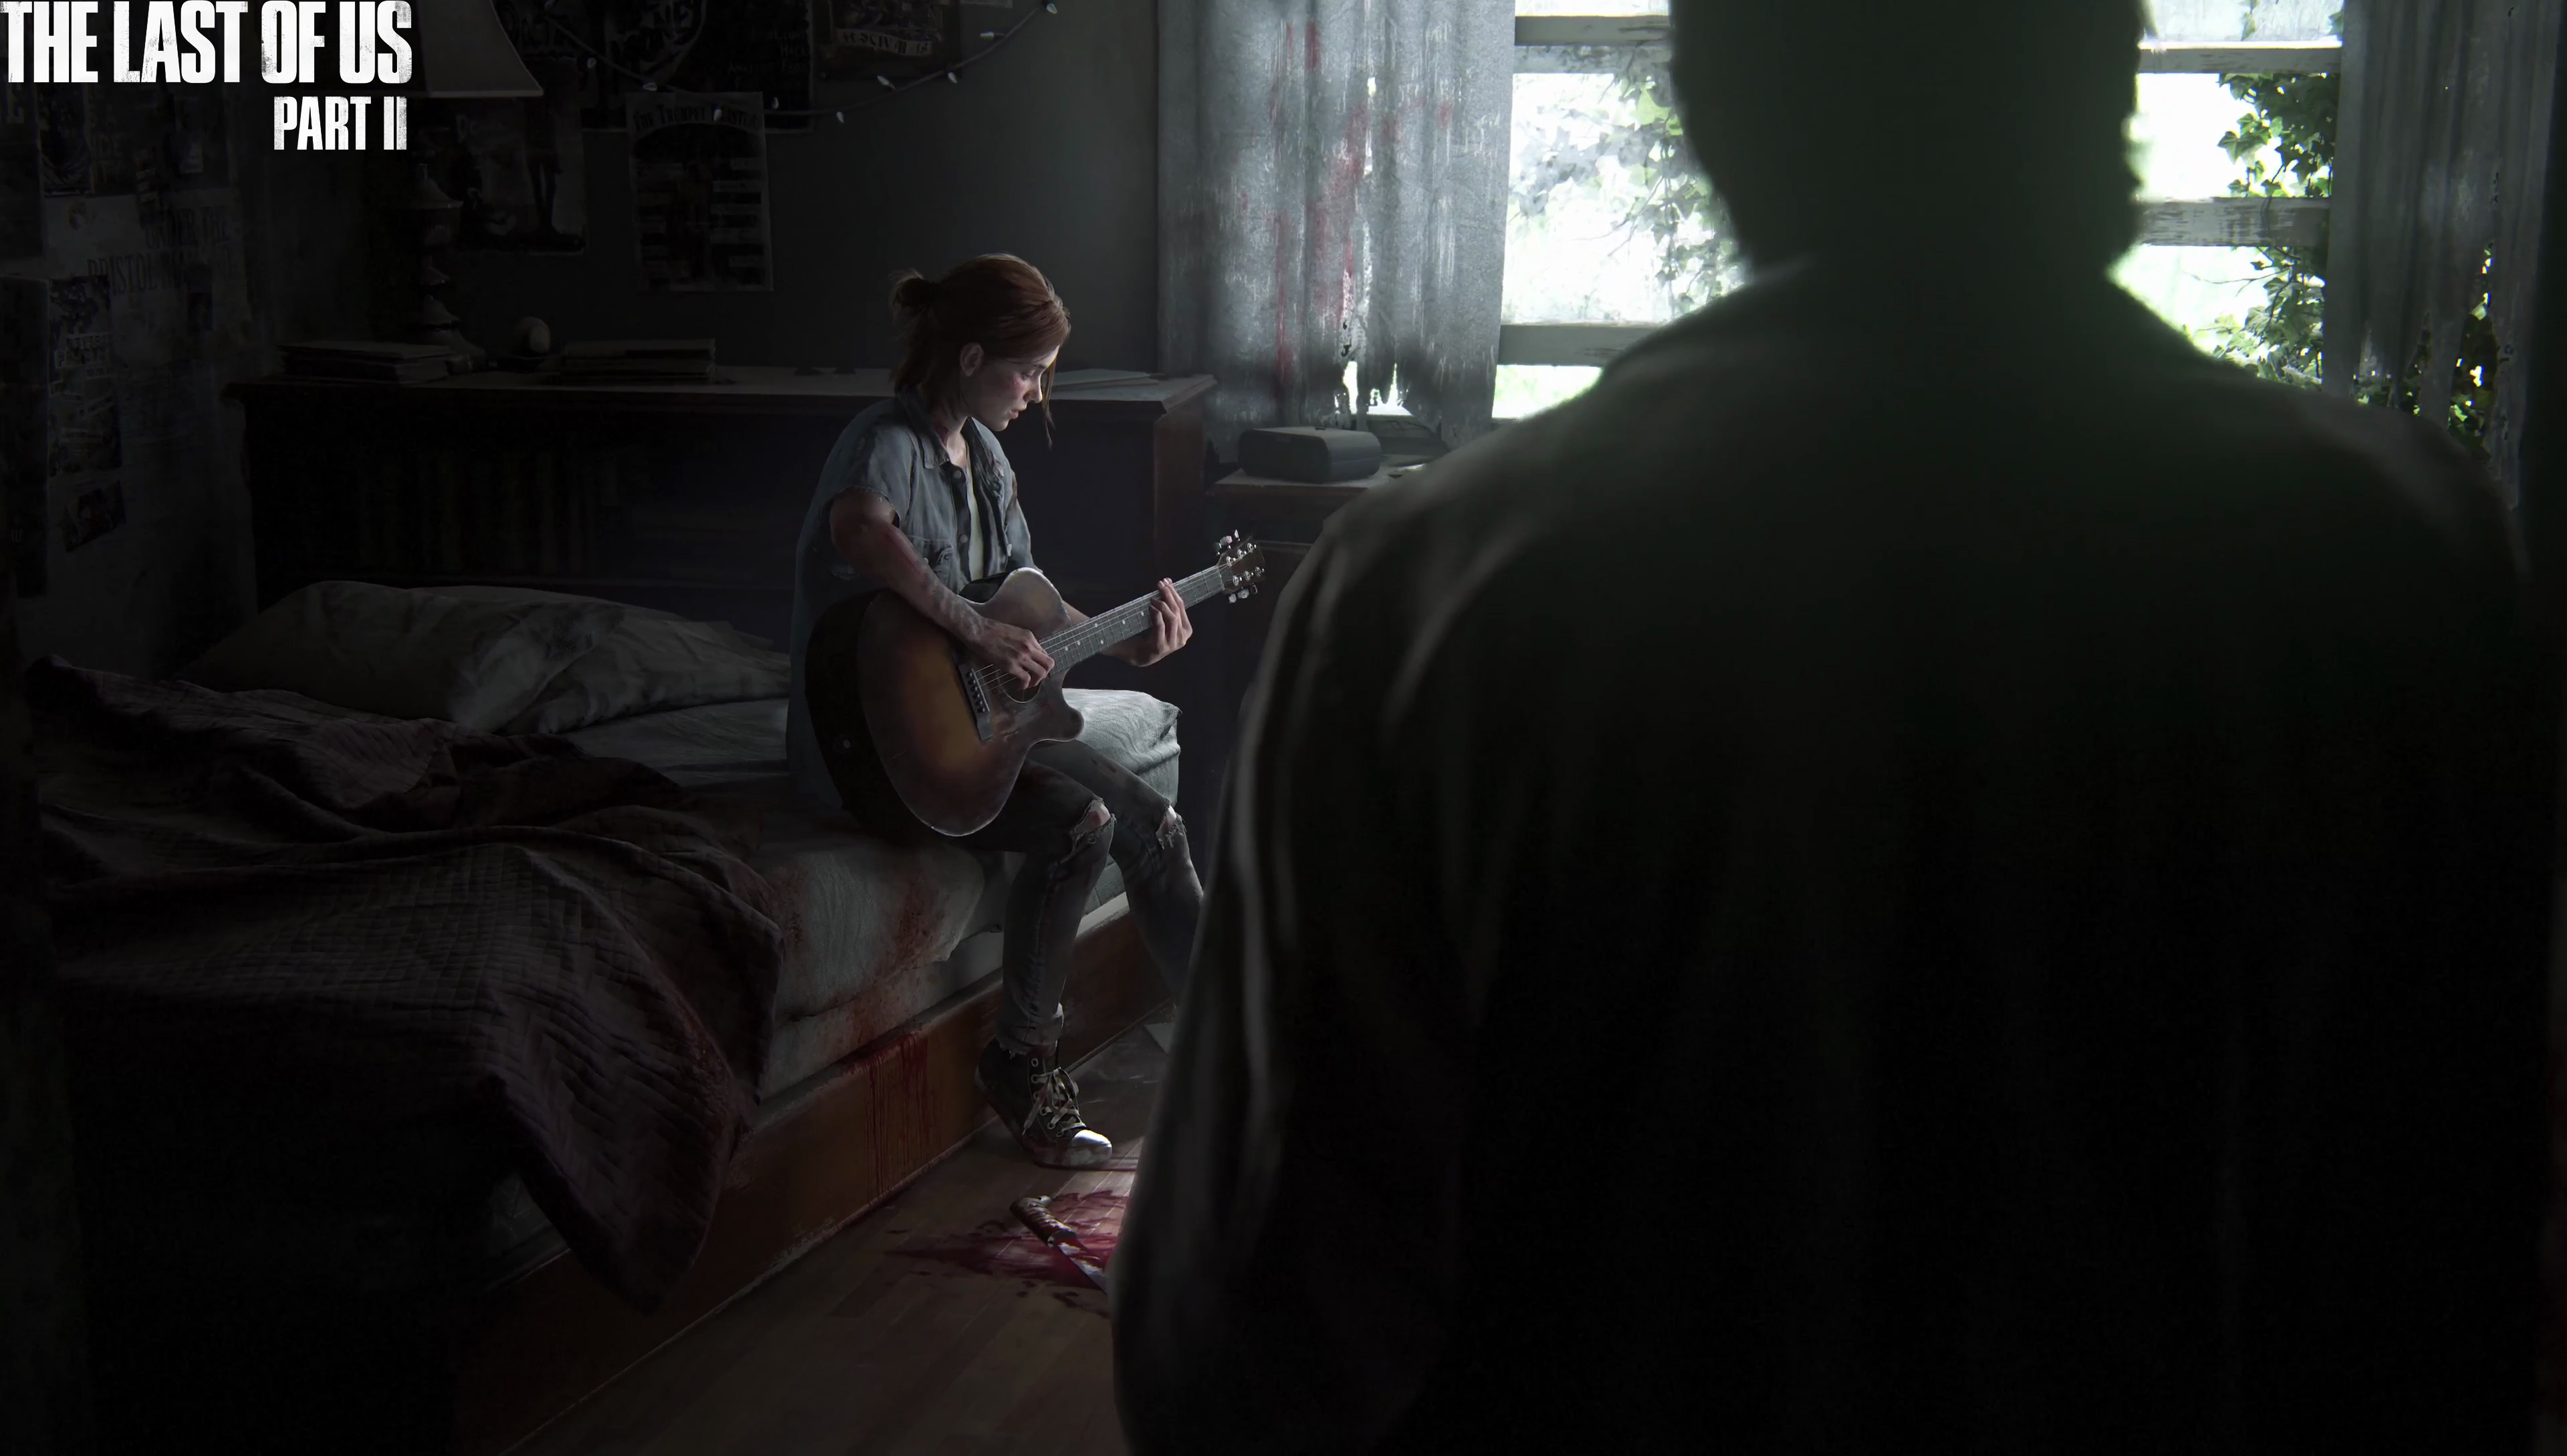 4K 38 Wallpaper / Screenshots from The Last of Us Part 2 Reveal